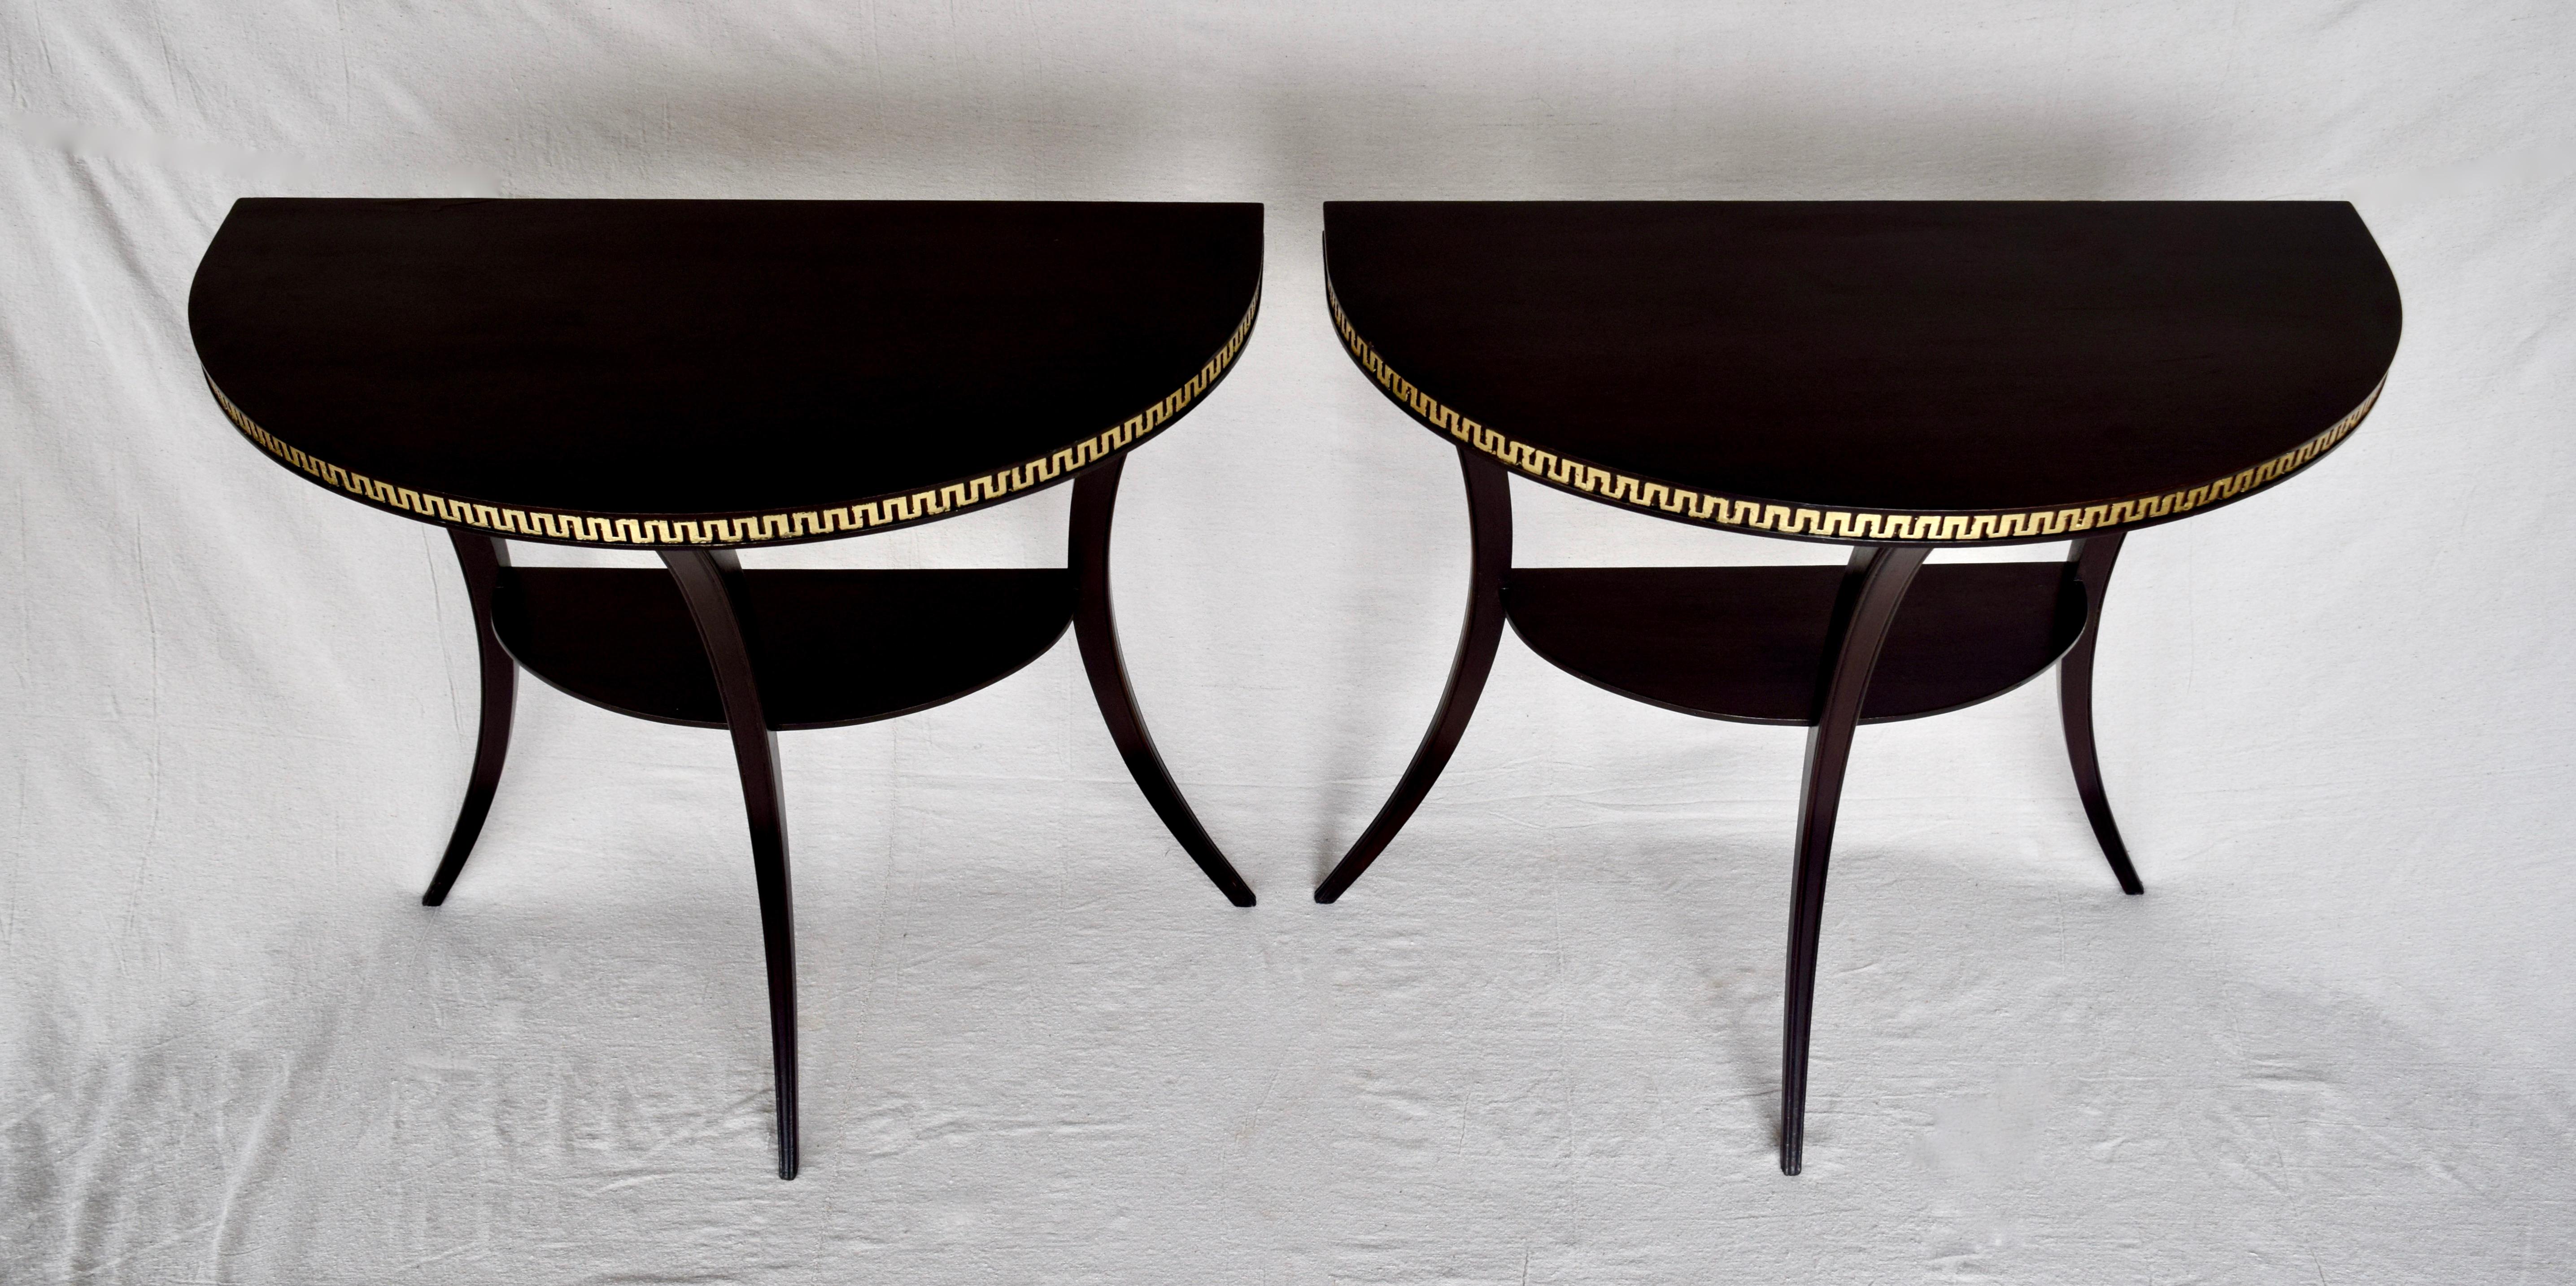 North American Pair of 1920s Neoclassical Style Demilune Klismos Tables